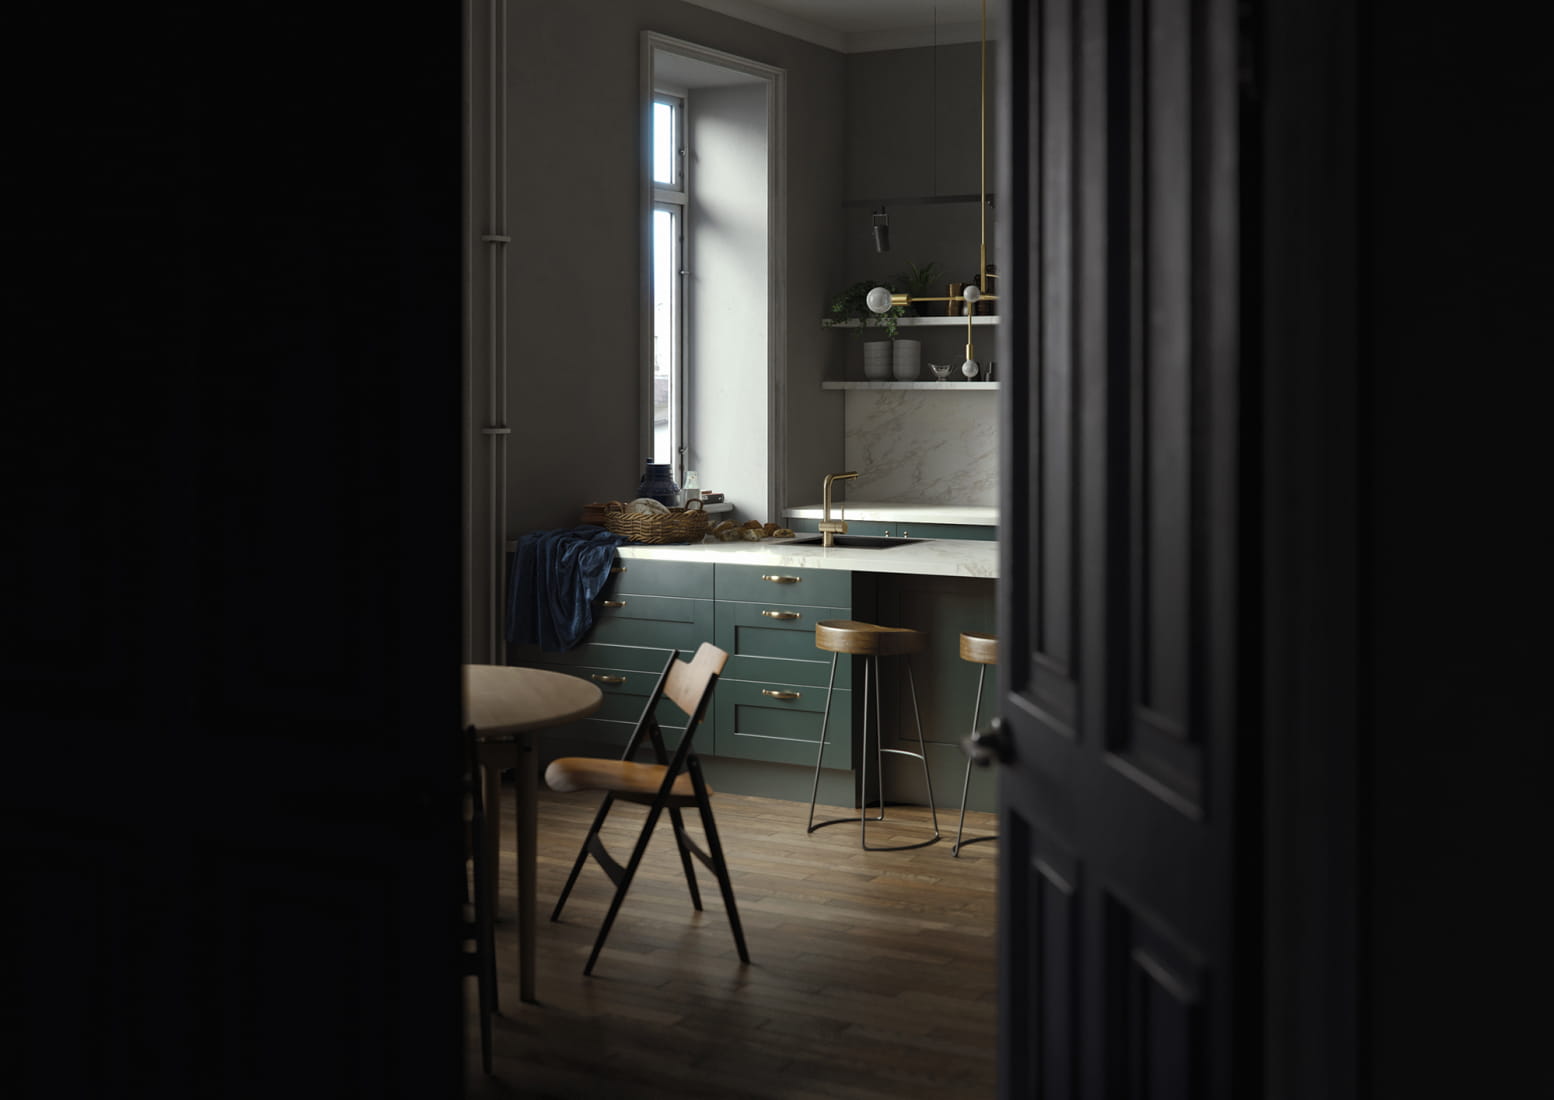 painting-the-light-cgi-kitchen-campaign